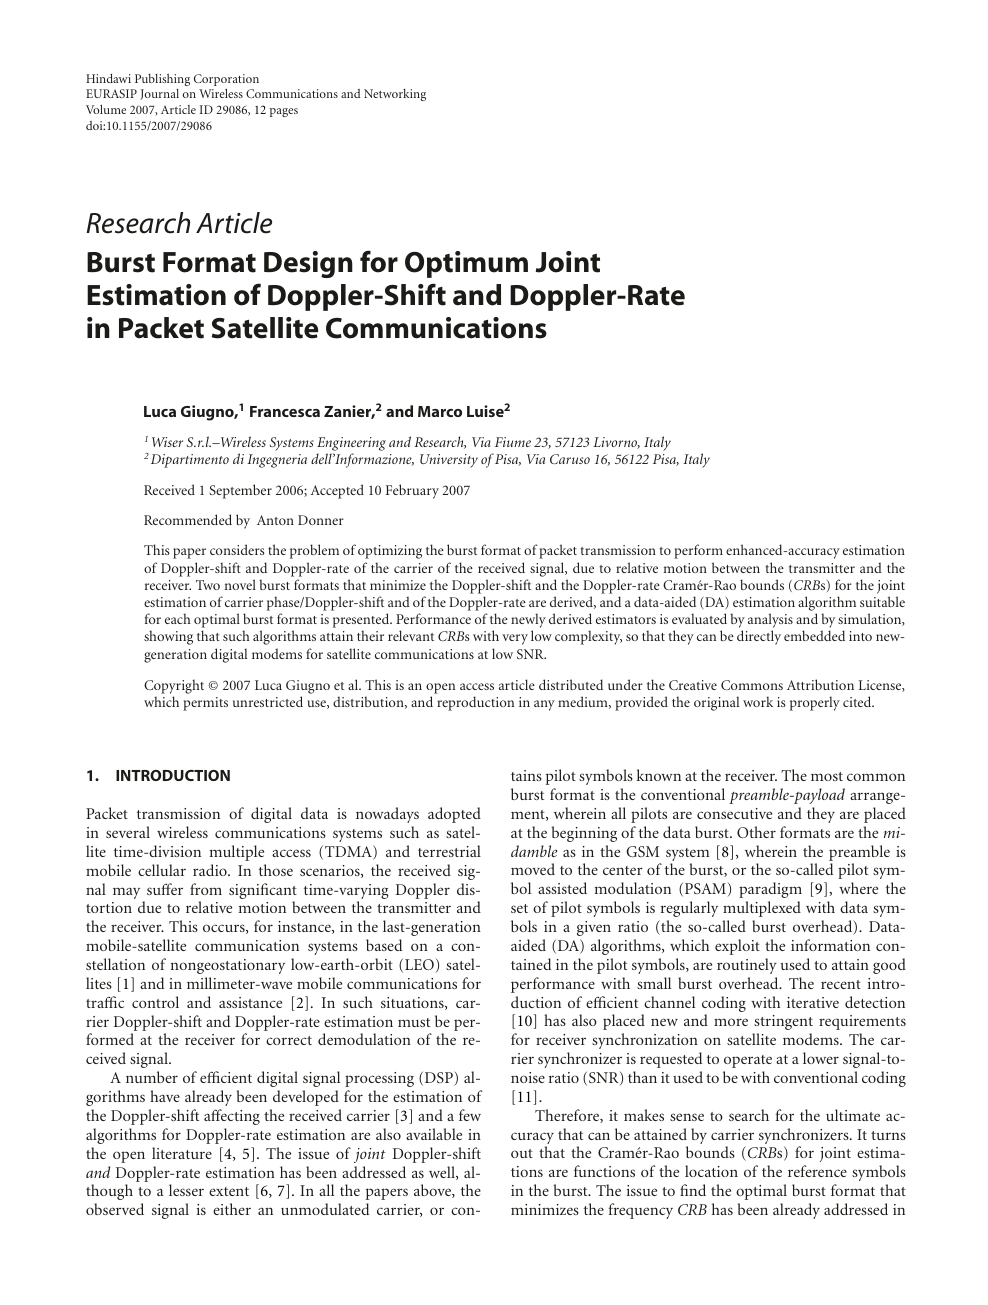 Burst Format Design For Optimum Joint Estimation Of Doppler Shift And Doppler Rate In Packet Satellite Communications Topic Of Research Paper In Electrical Engineering Electronic Engineering Information Engineering Download Scholarly Article Pdf And